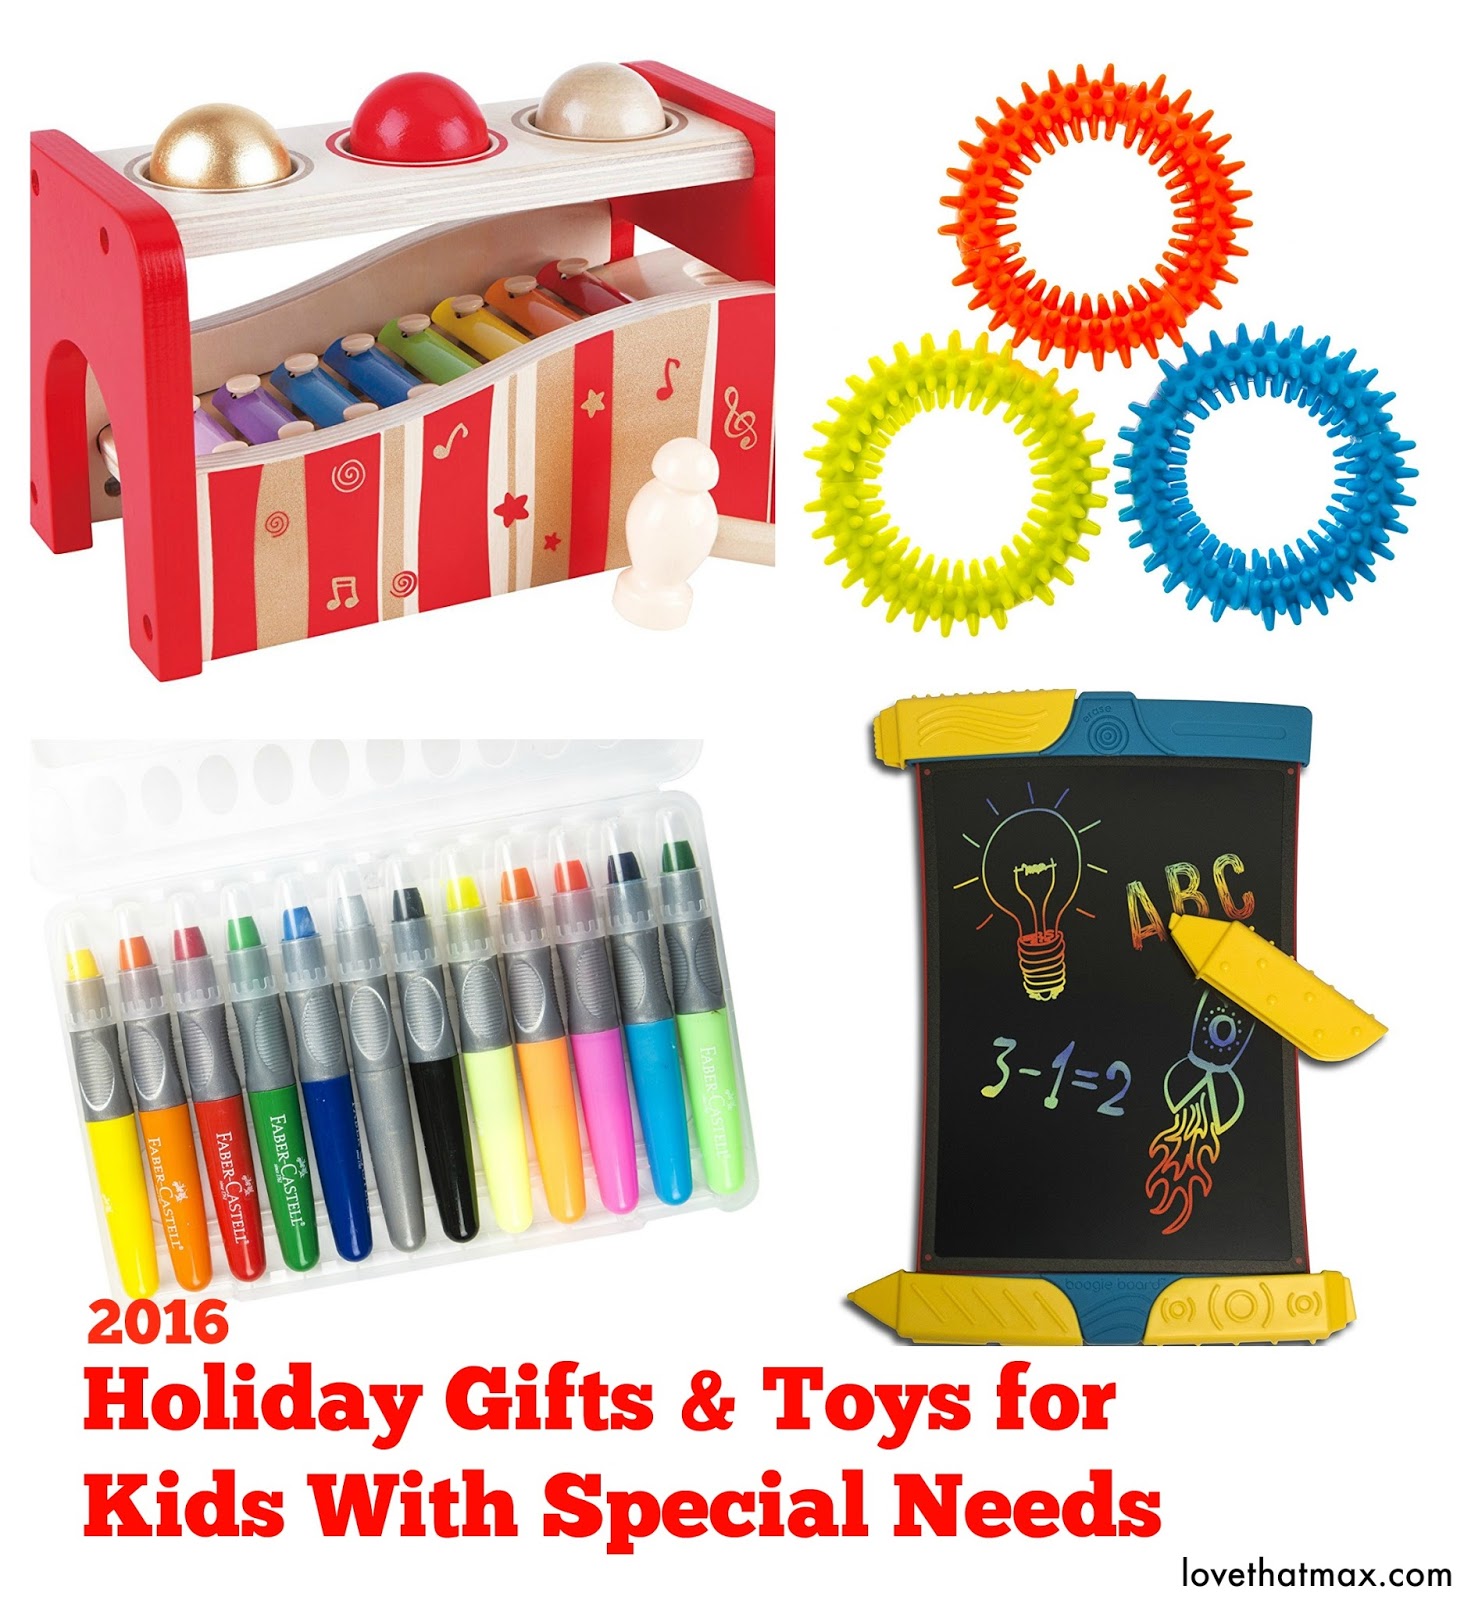 Love That Max : Holiday gifts and toys for kids with special needs: 2016